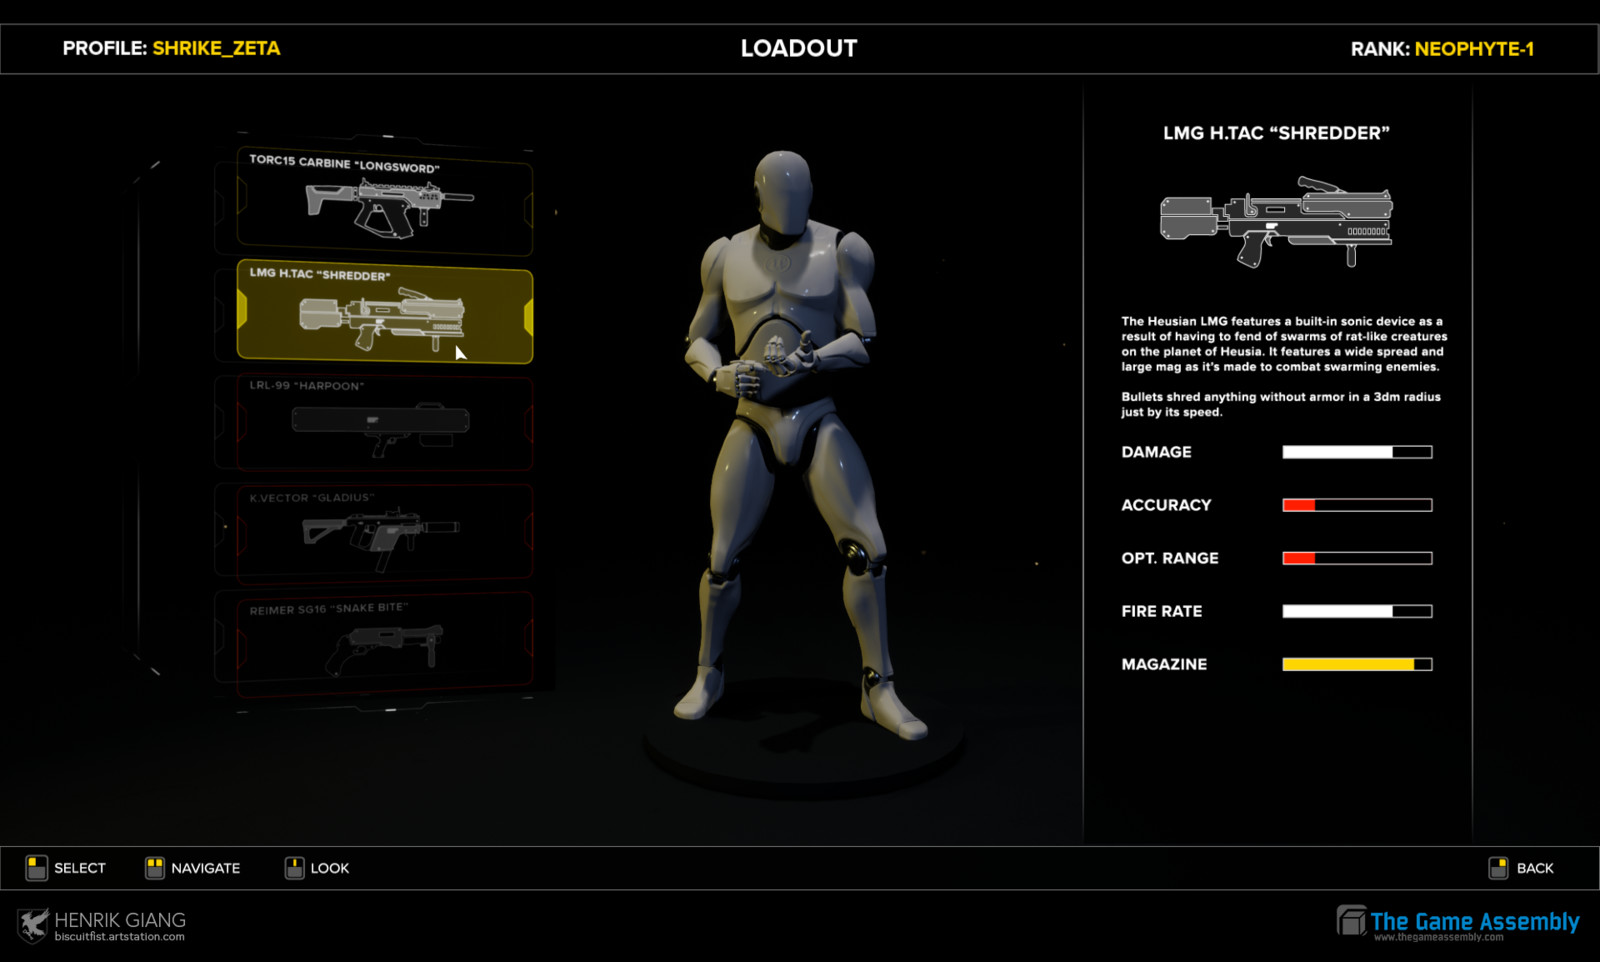 Sub-menus to access more weapons.